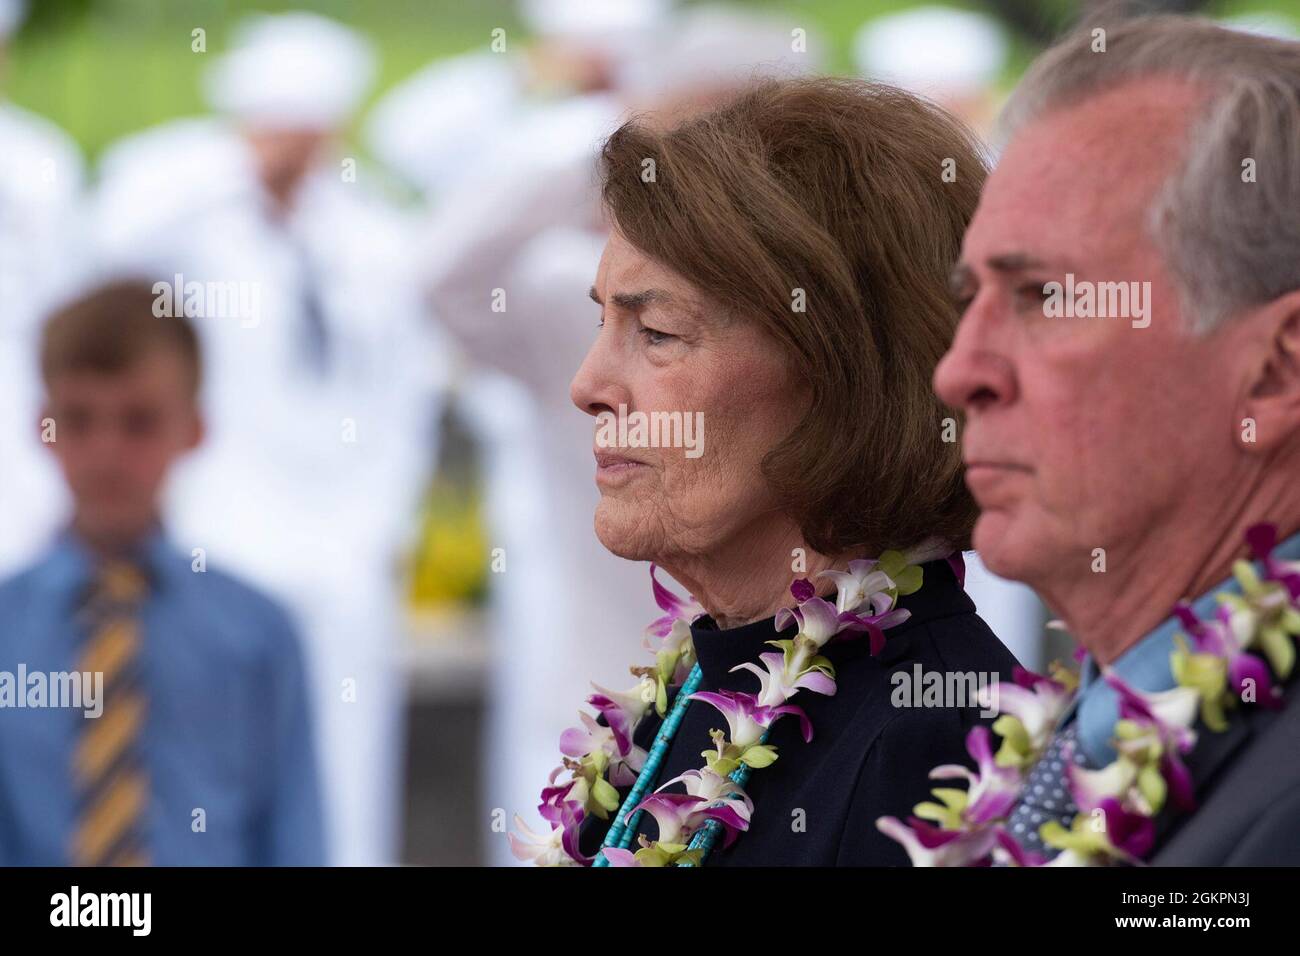 Family members of the Trapp Brothers watch as military honors are rendered during a funeral for the Trapp brothers at the National Memorial Cemetery of the Pacific, Honolulu, Hawaii, June 15, 2021. The Trapp brothers were assigned to the USS Oklahoma, which sustained fire from Japanese aircraft and multiple torpedo hits causing the ship to capsize and resulted in the deaths of more than 400 crew members on Dec. 7, 1941, at Ford Island, Pearl Harbor. The Trapp brothers were recently identified through DNA analysis by the Defense POW/MIA Accounting Agency (DPAA) forensic laboratory and laid to r Stock Photo